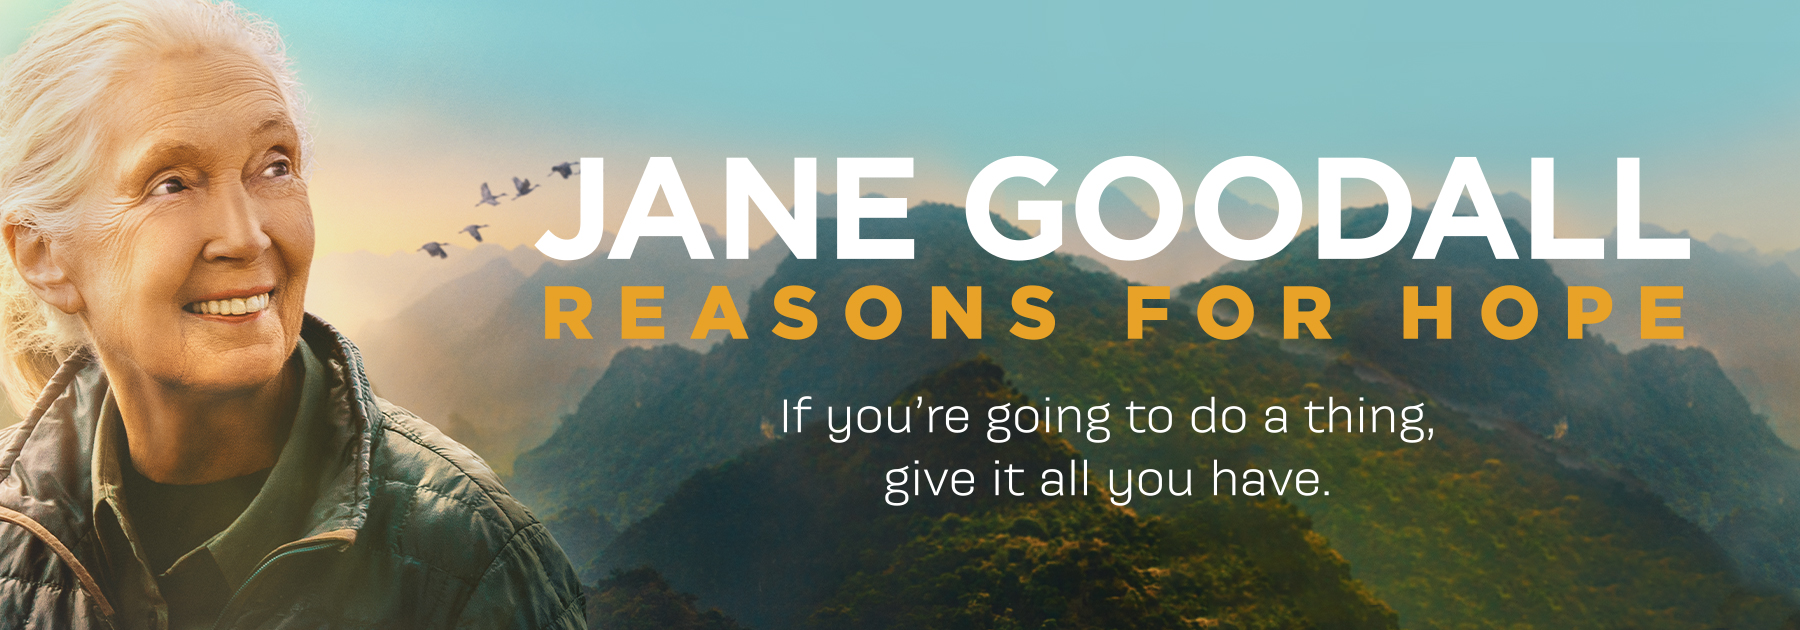 Jane Goodall – Reasons for Hope. If you're going to do a thing, give it all you have.Image of Jane Goodall looking right with a scenic view of mountains/hills and birds flying in the background at sunset.